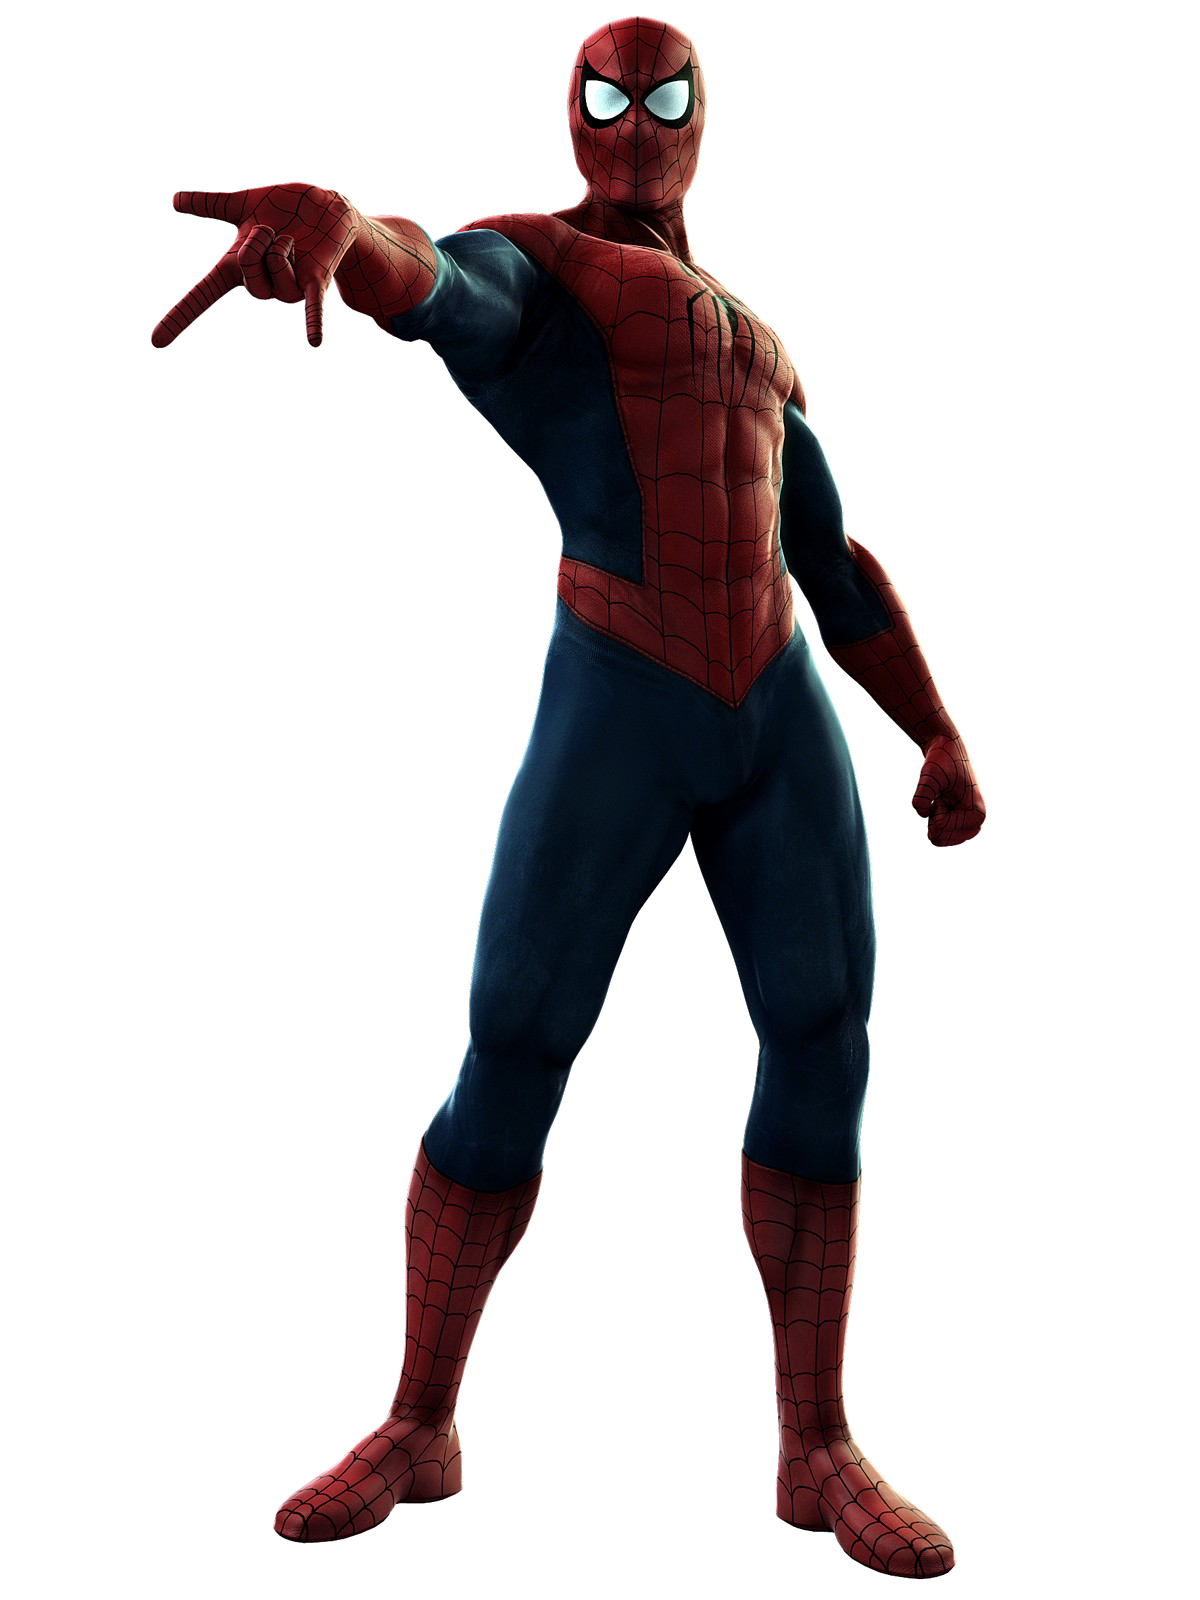 Spider-Man Standing PNG Image With Transparent Background